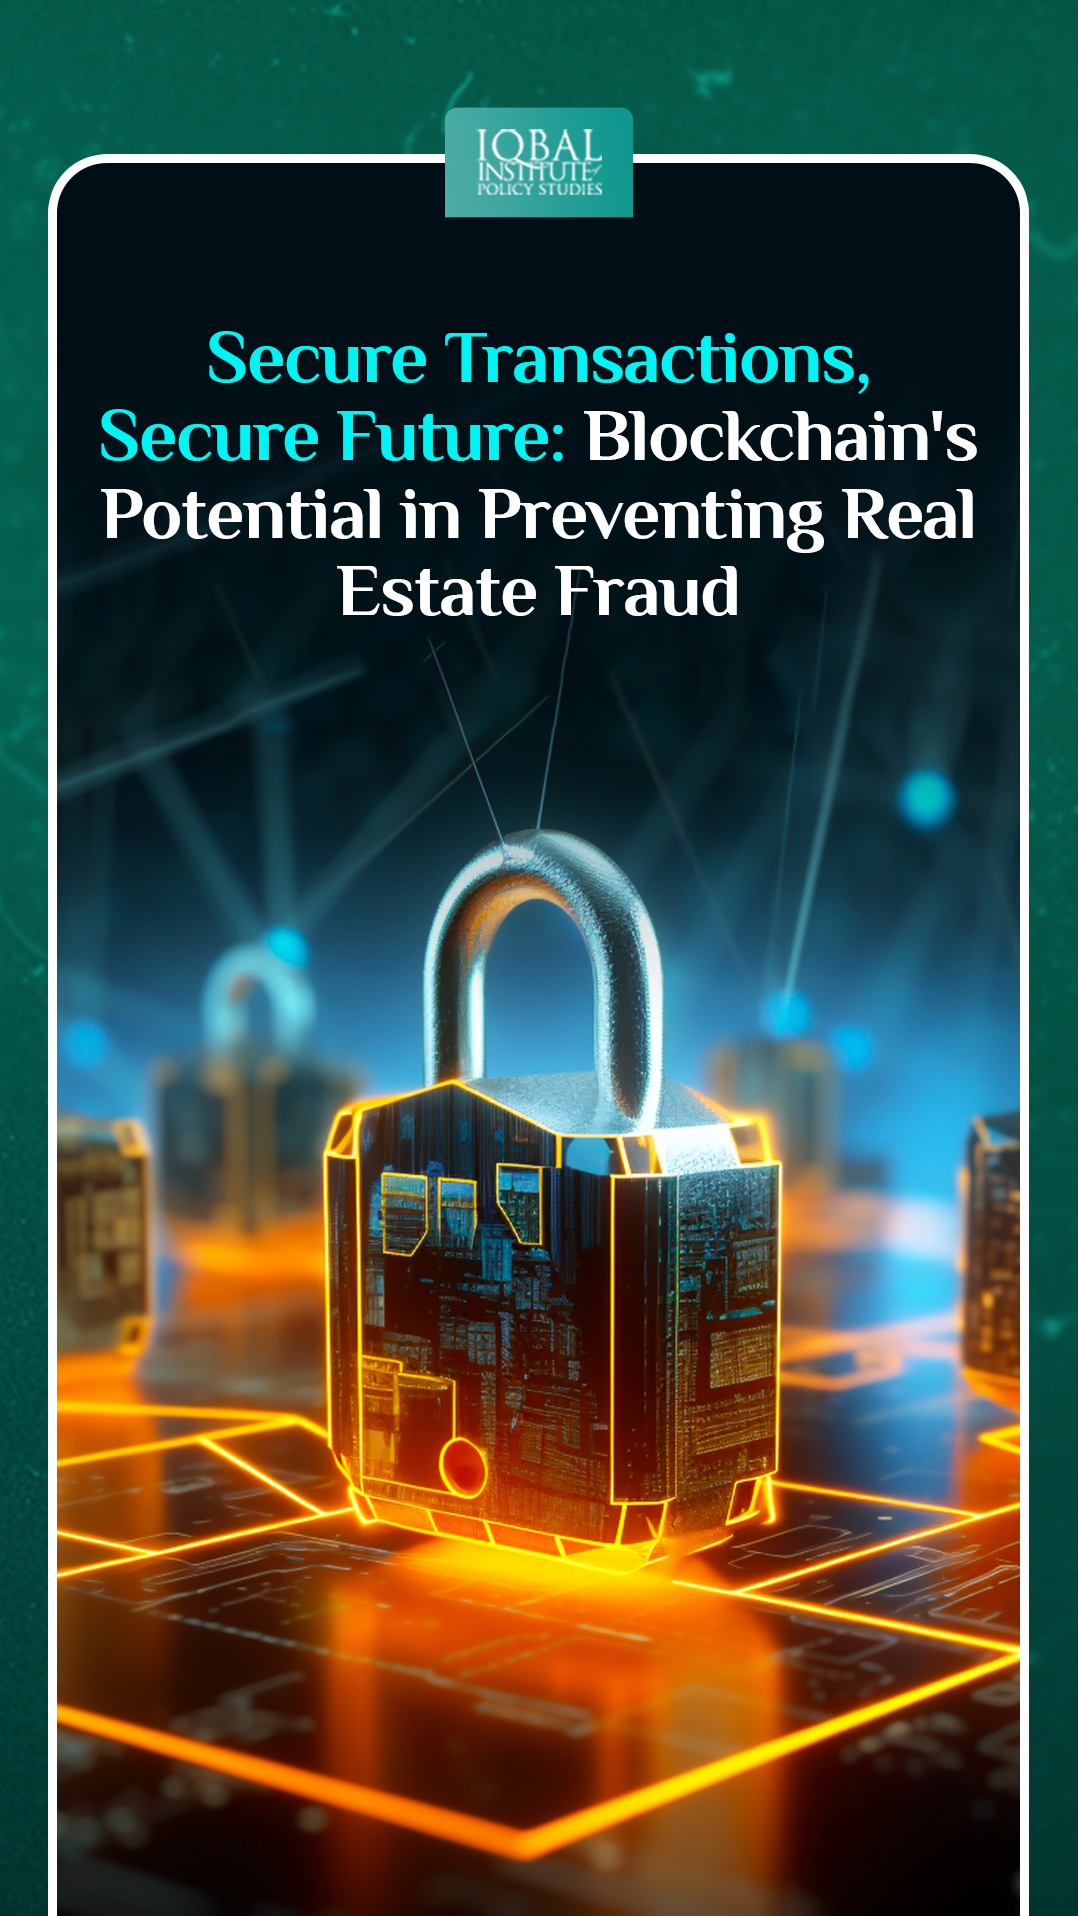 Secure Transactions, Secure Future: Blockchain's Potential in Preventing Real Estate Fraud